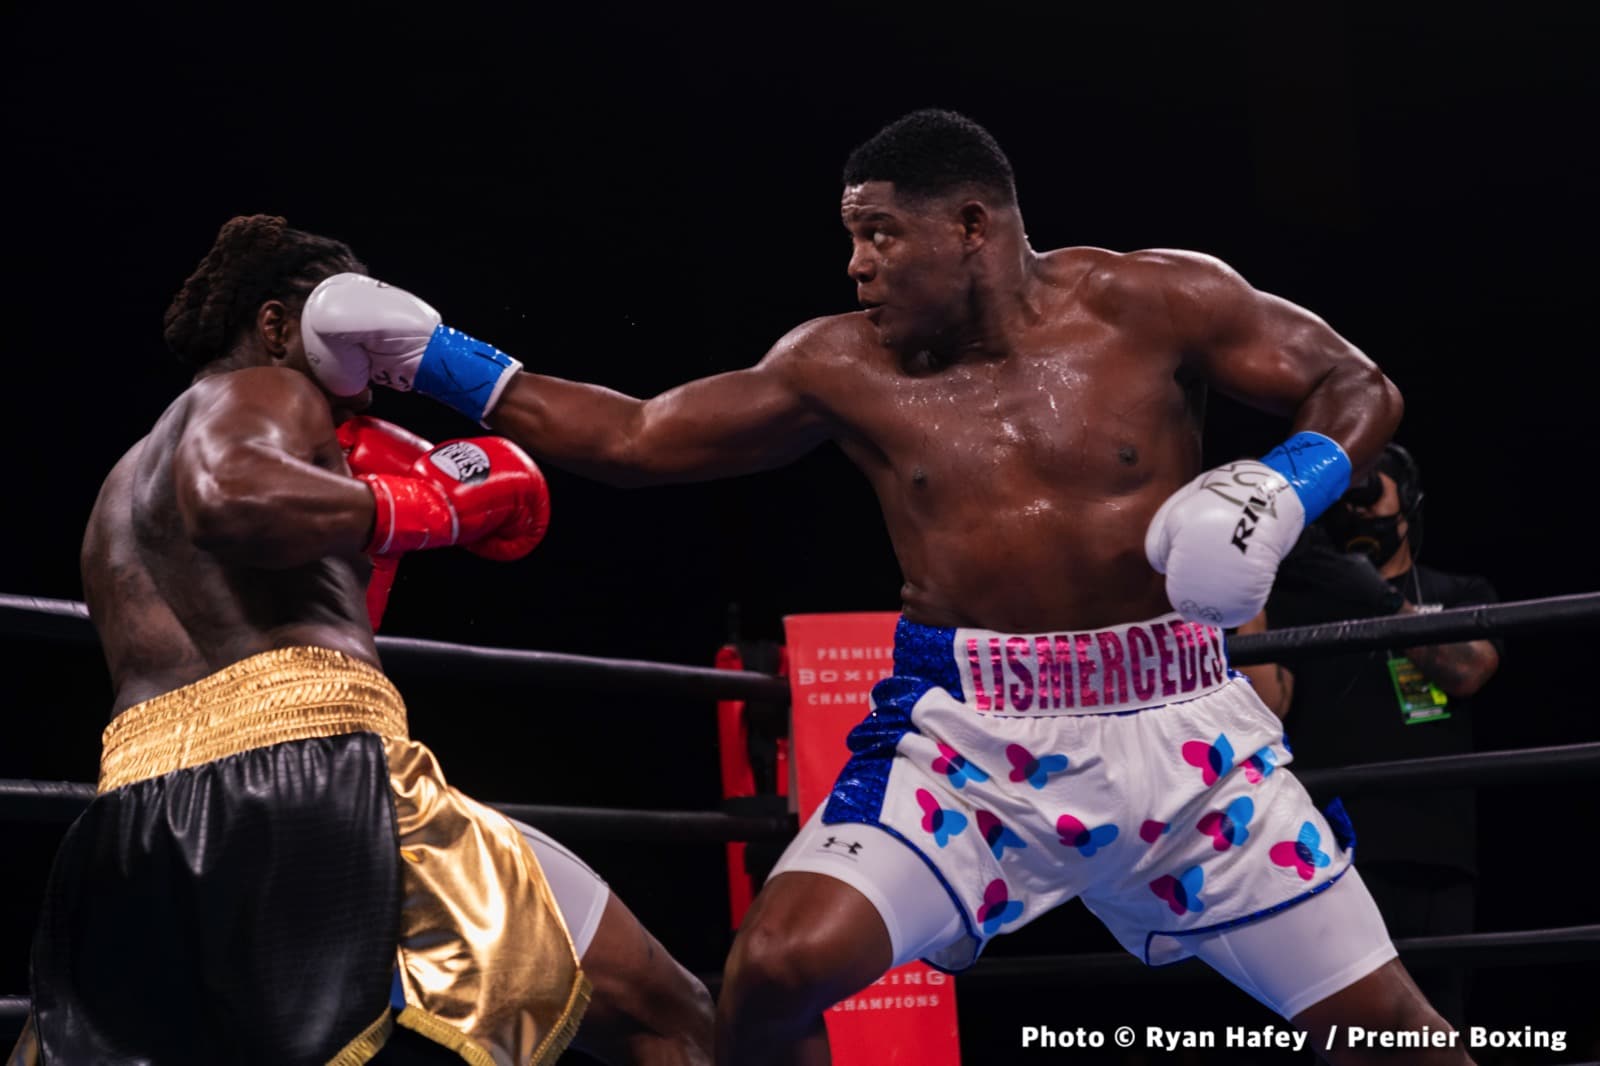 Luis Ortiz vs Martin Live Results From Hollywood, Florida